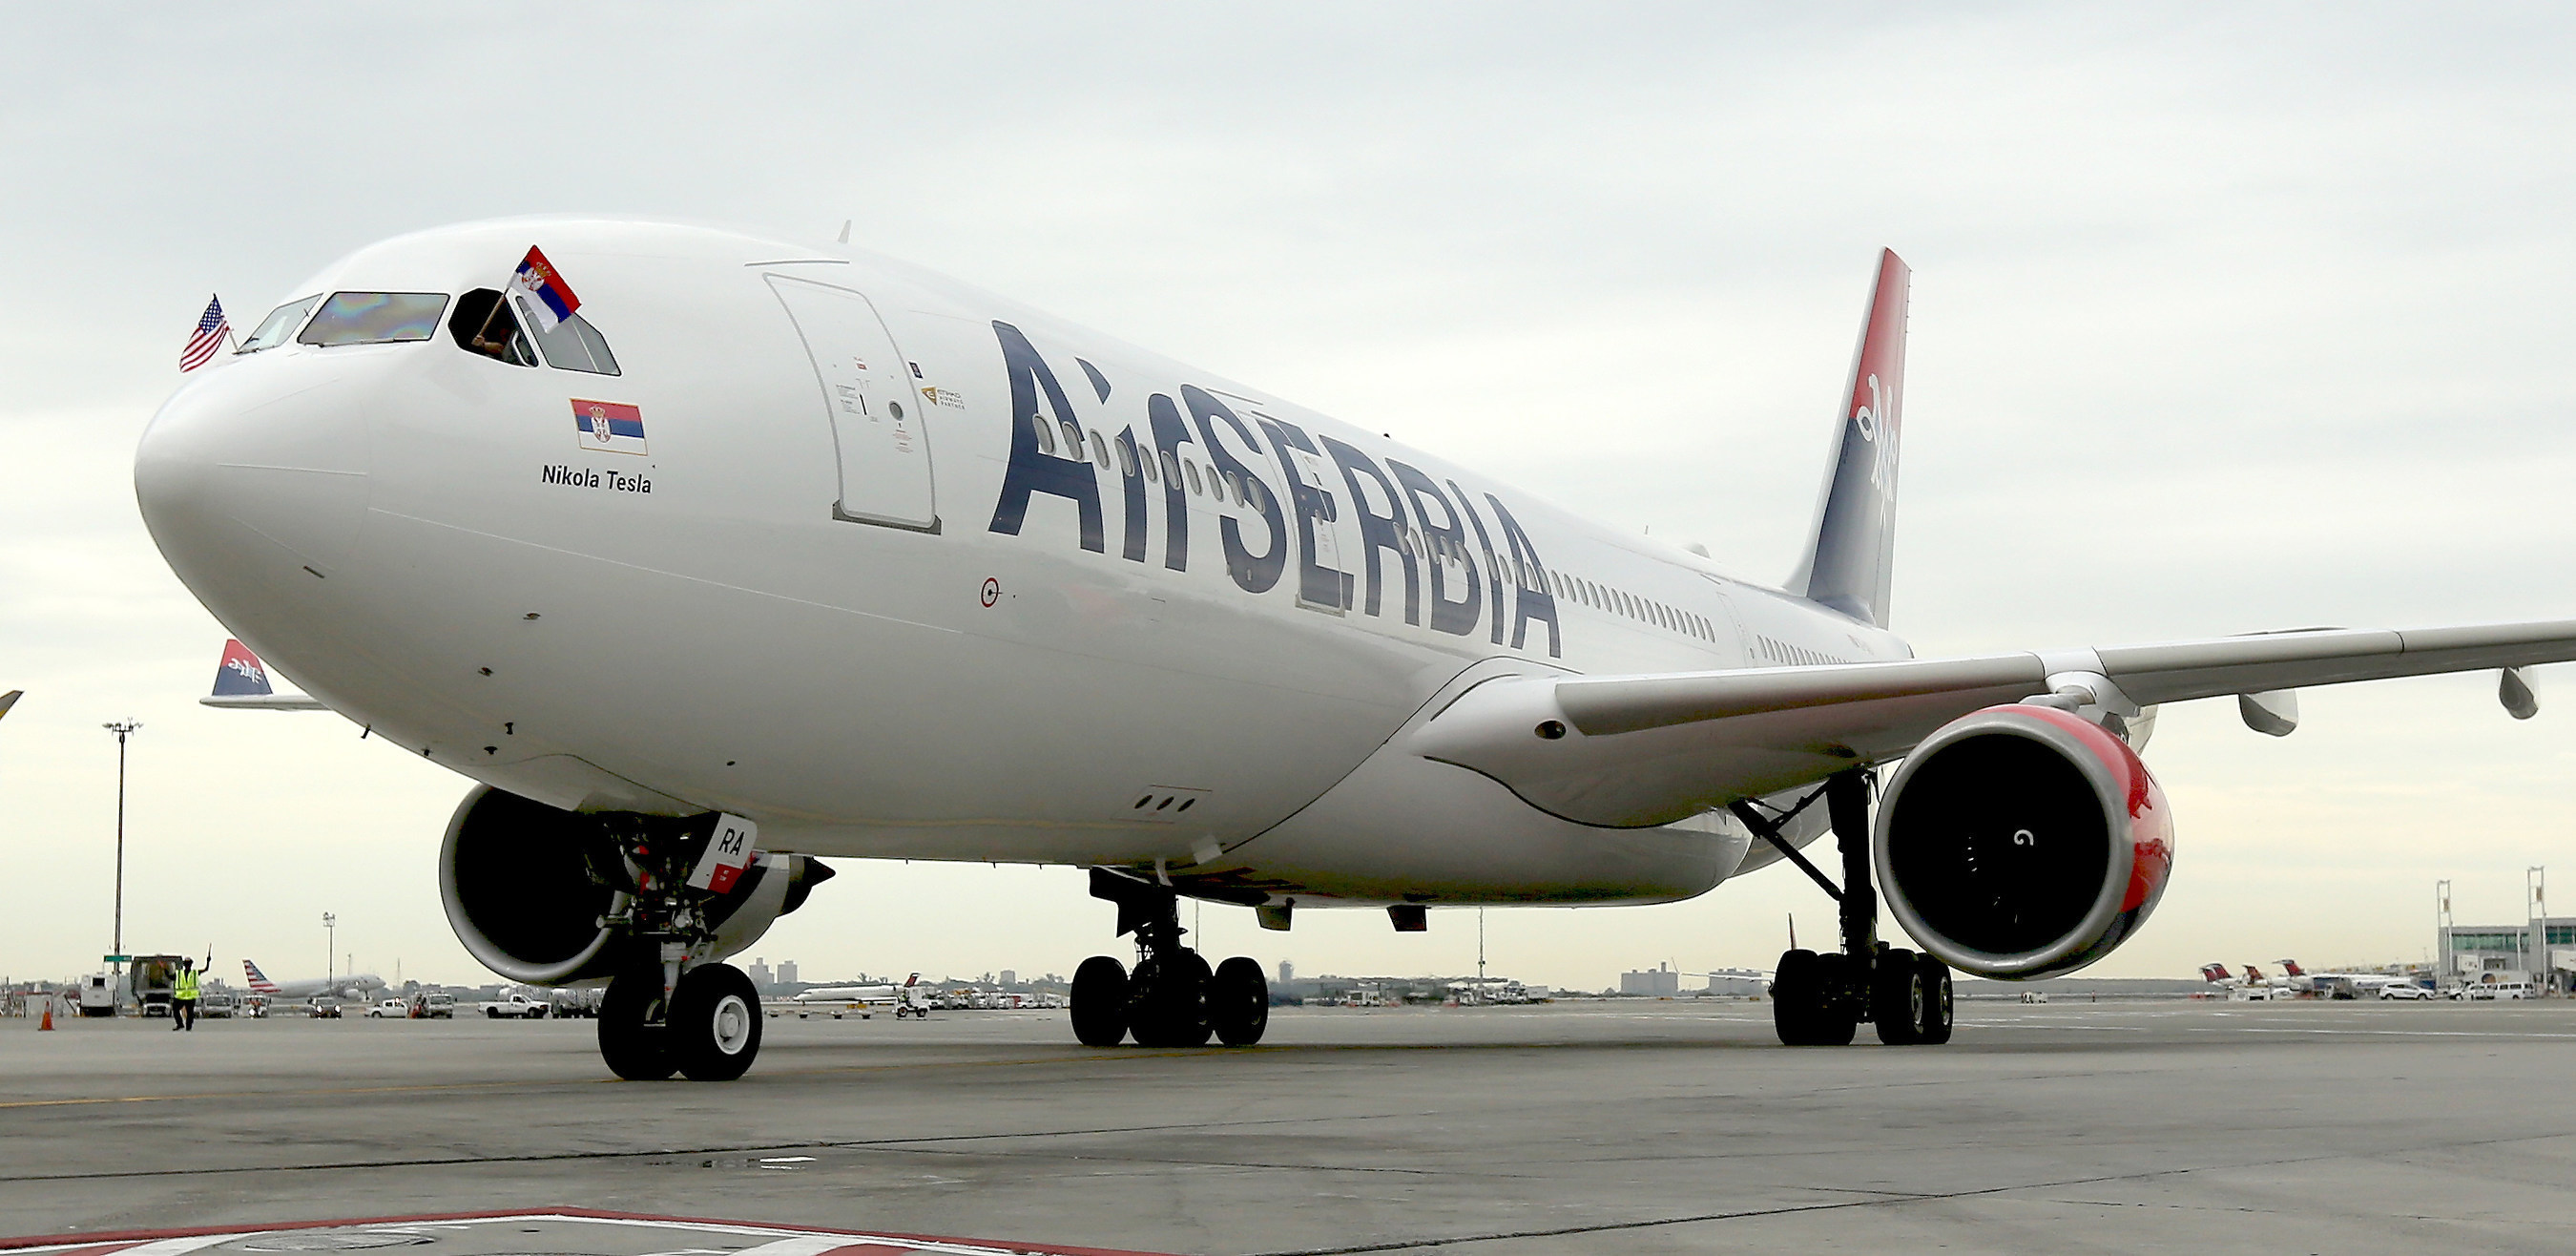 With Serbian and American flags flying high, Air Serbia's first flight JU 500 from Belgrade to New York taxis to a stop at JFK International Airport.